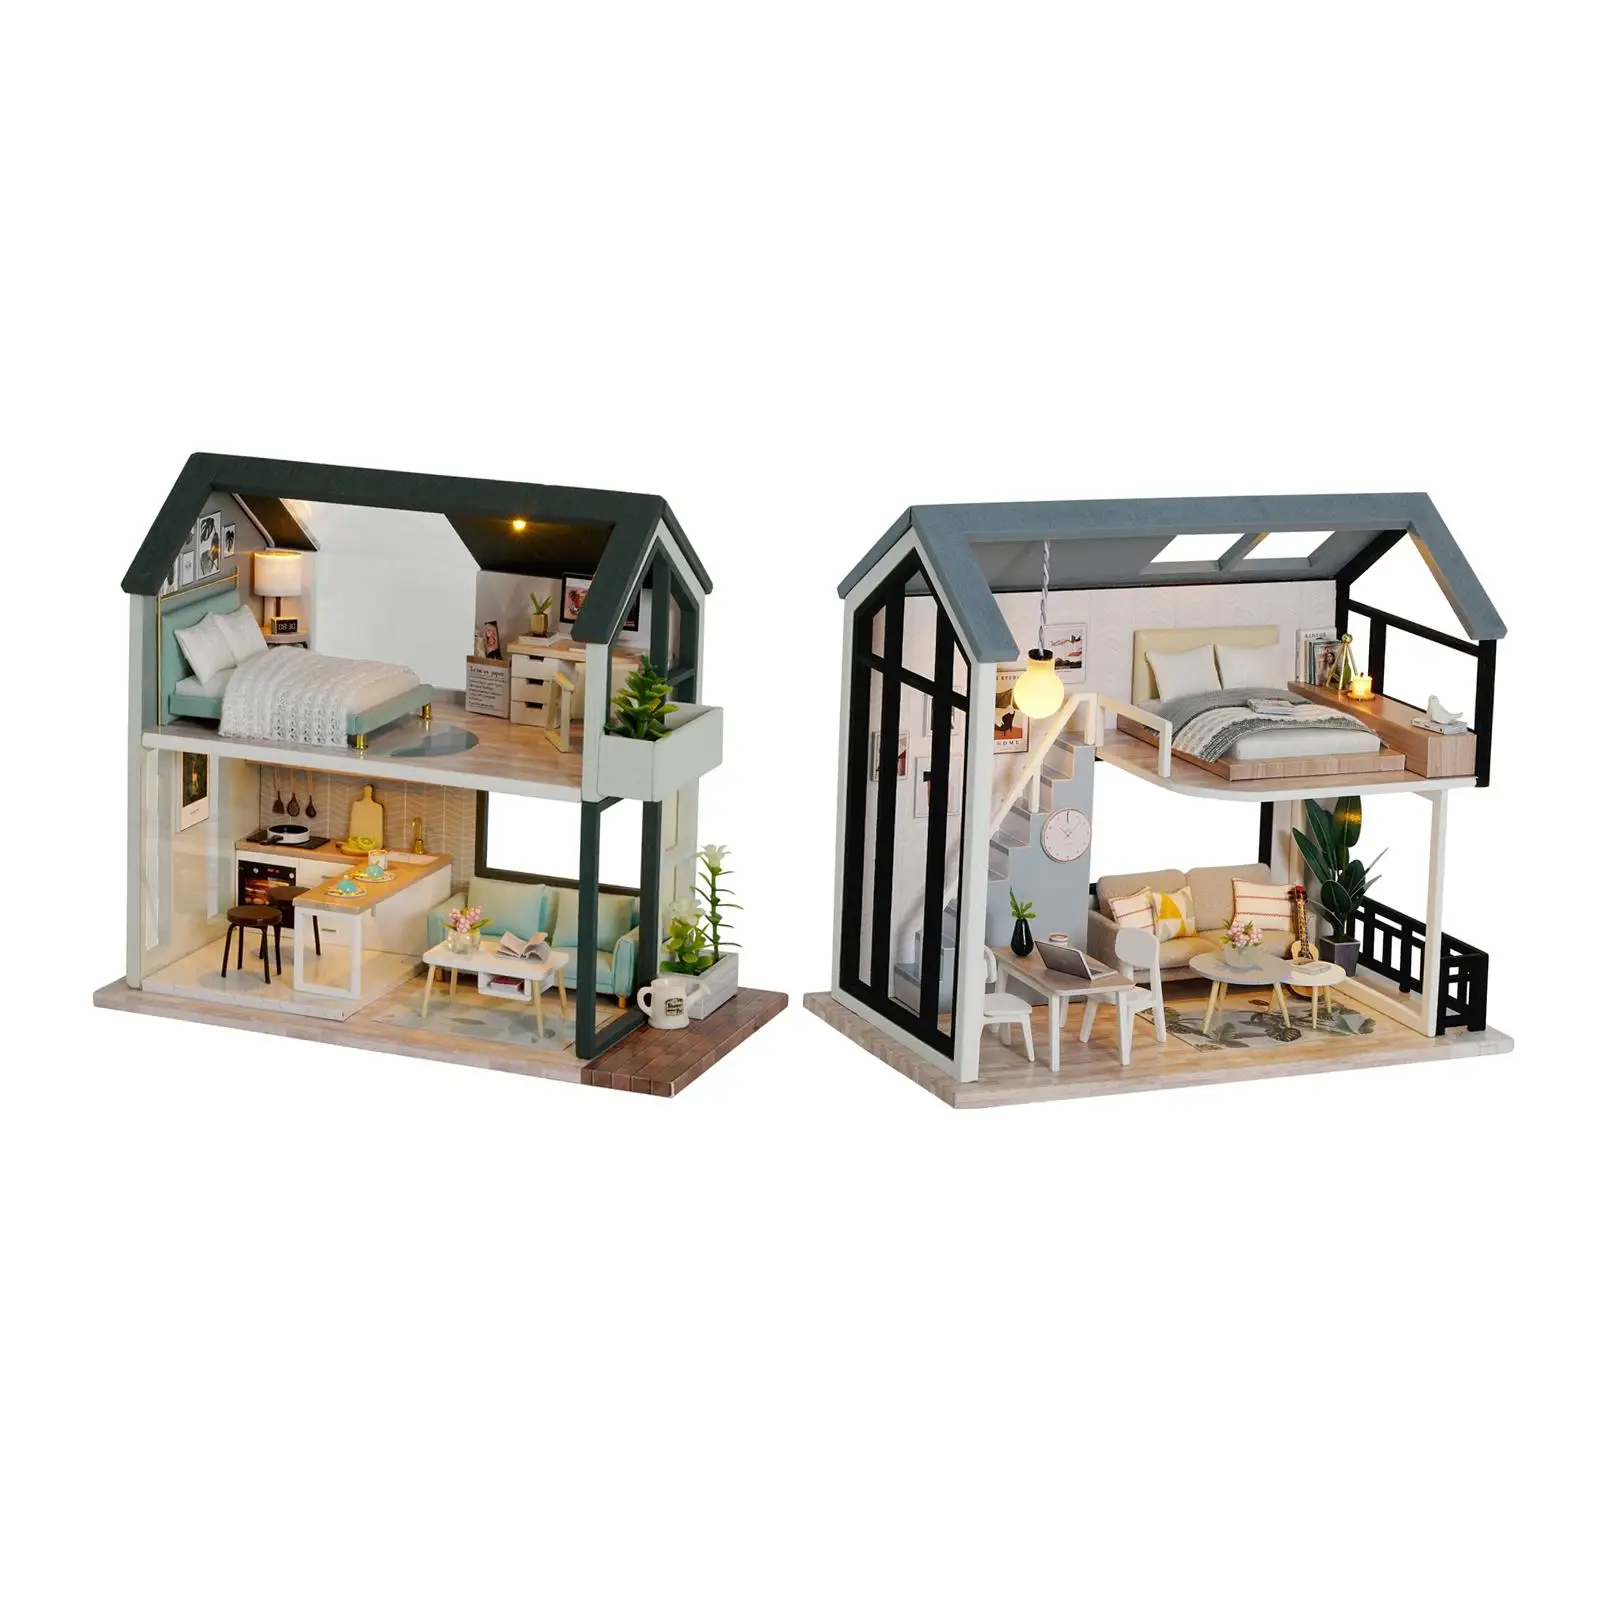 2x 1/24 Scale DIY Doll House Wooden Miniature Dollhouse Furniture Kit